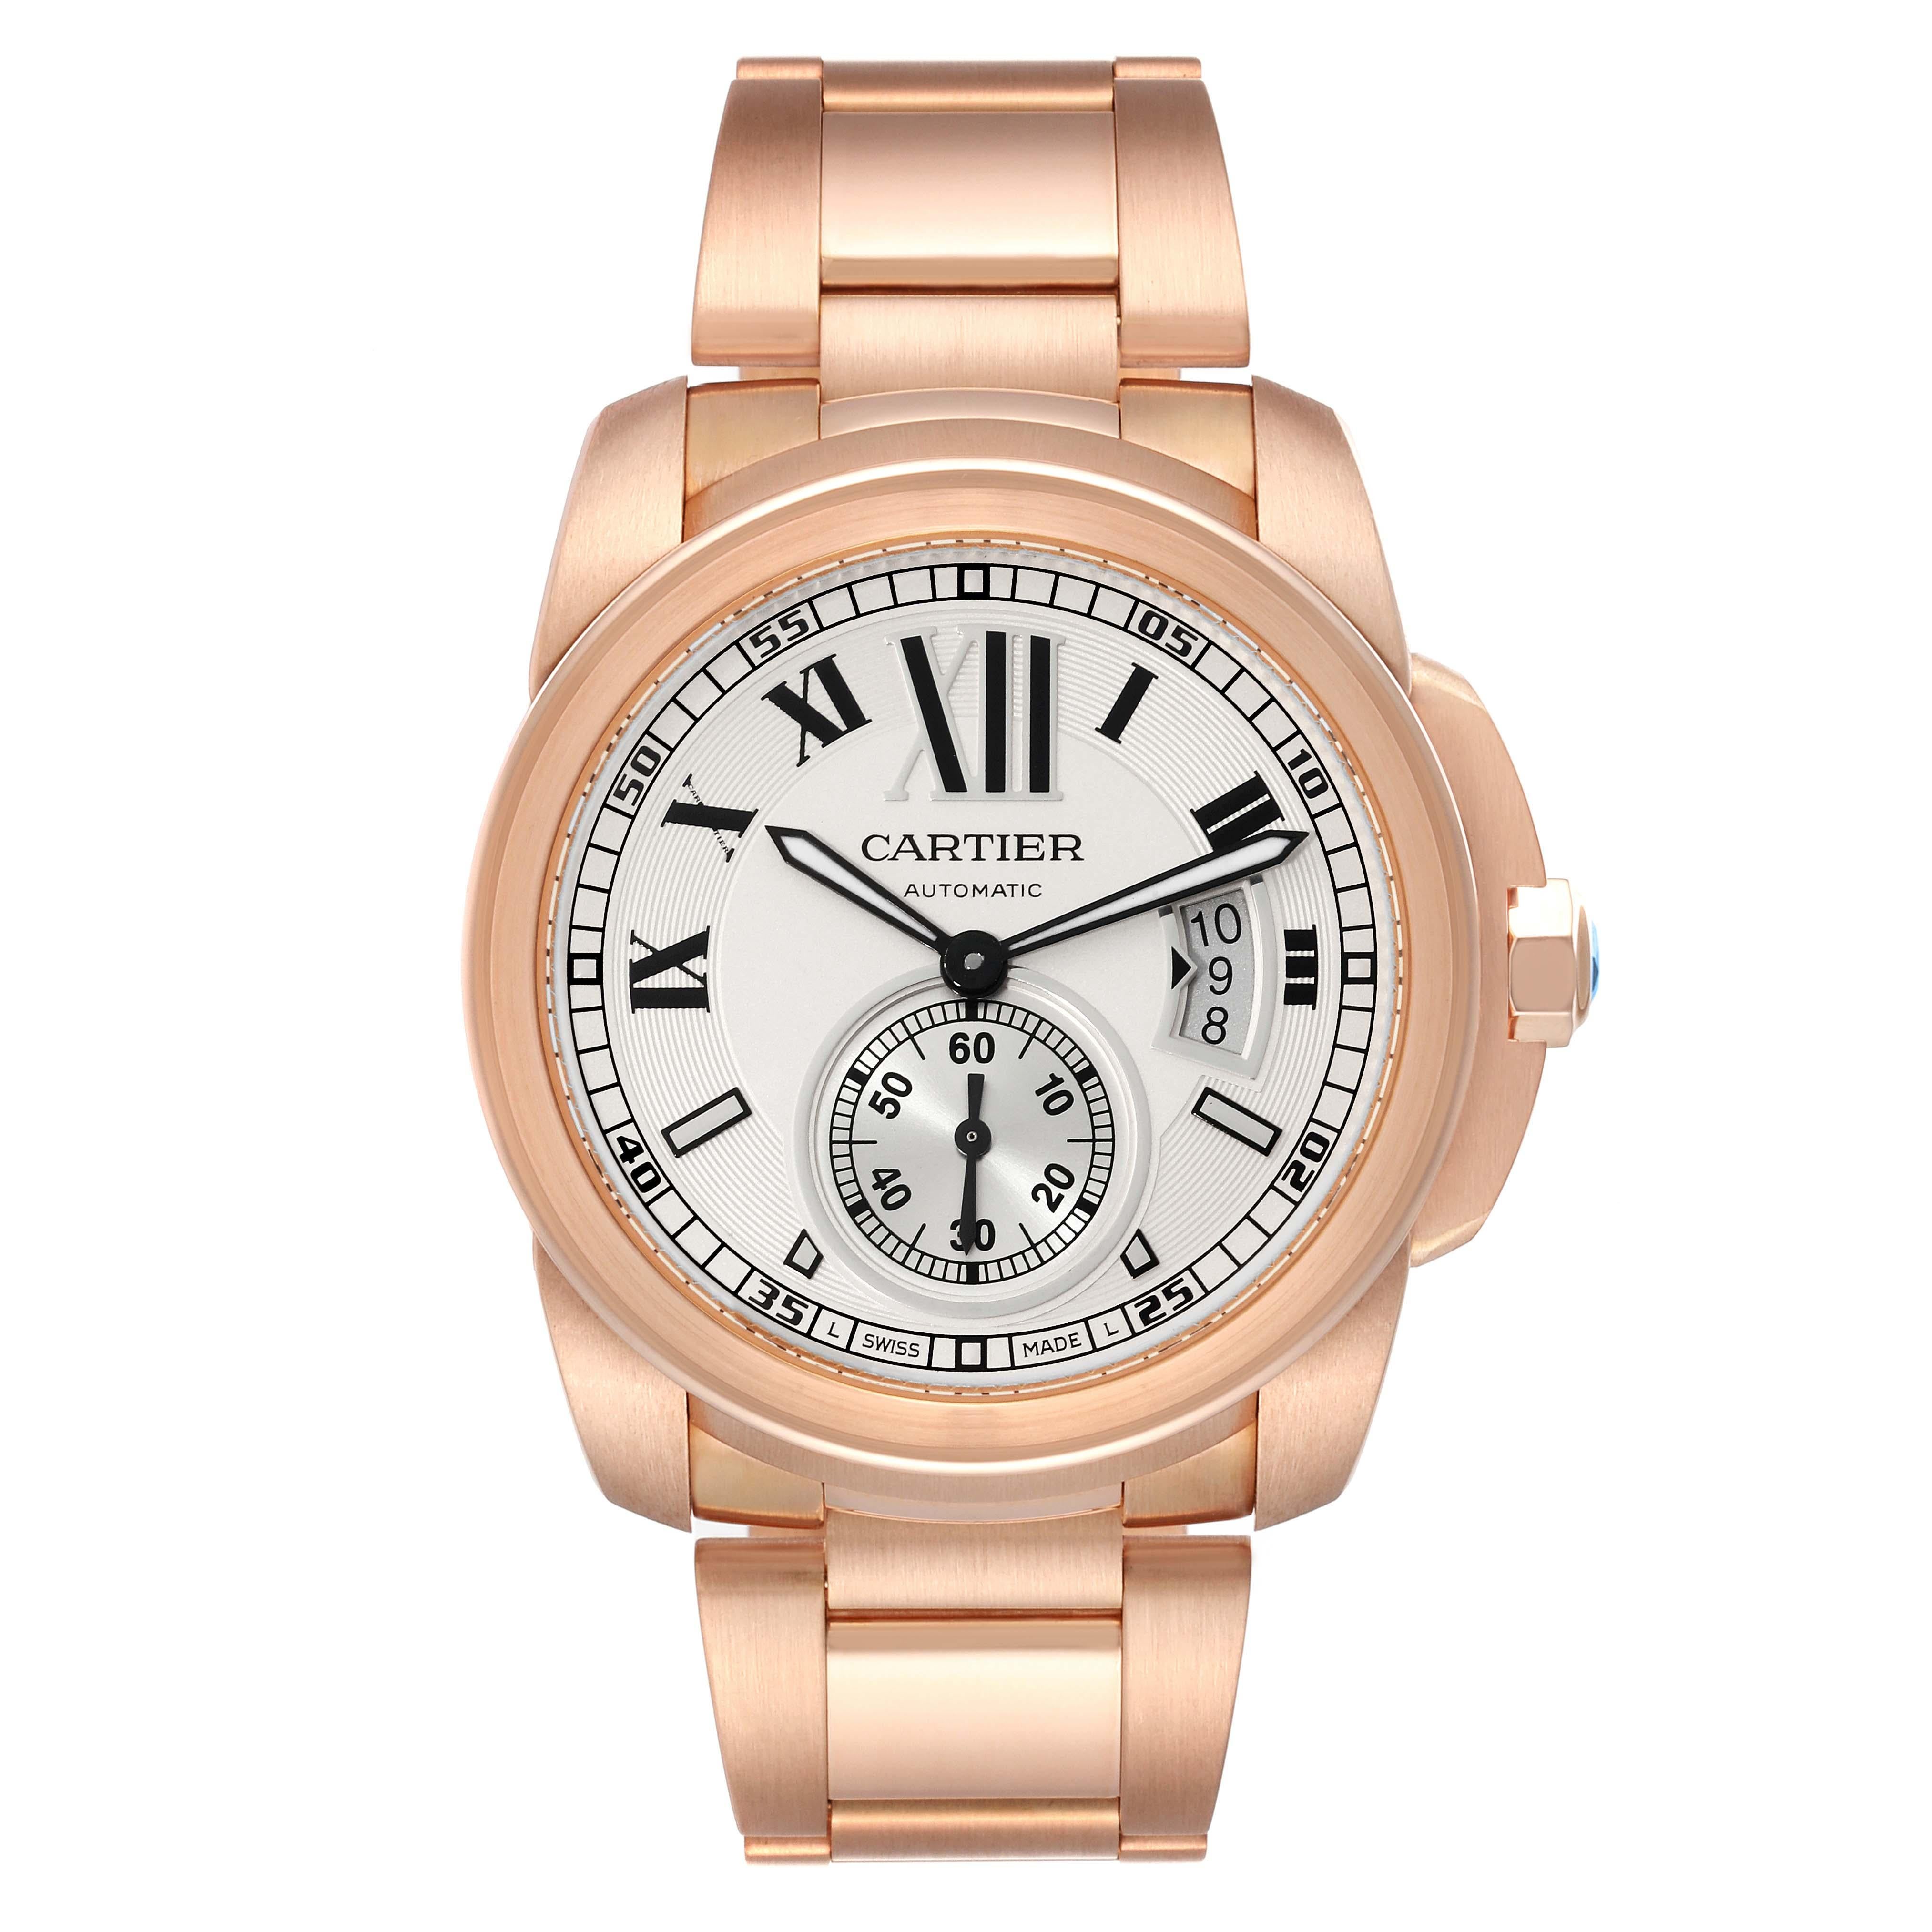 Cartier Calibre Rose Gold Silver Dial Automatic Mens Watch W7100018. Automatic self-winding movement. 18K rose gold round case 42 mm in diameter. 18K rose gold crown set with faceted blue sapphire cabochon. Transparent exhibition sapphire crystal